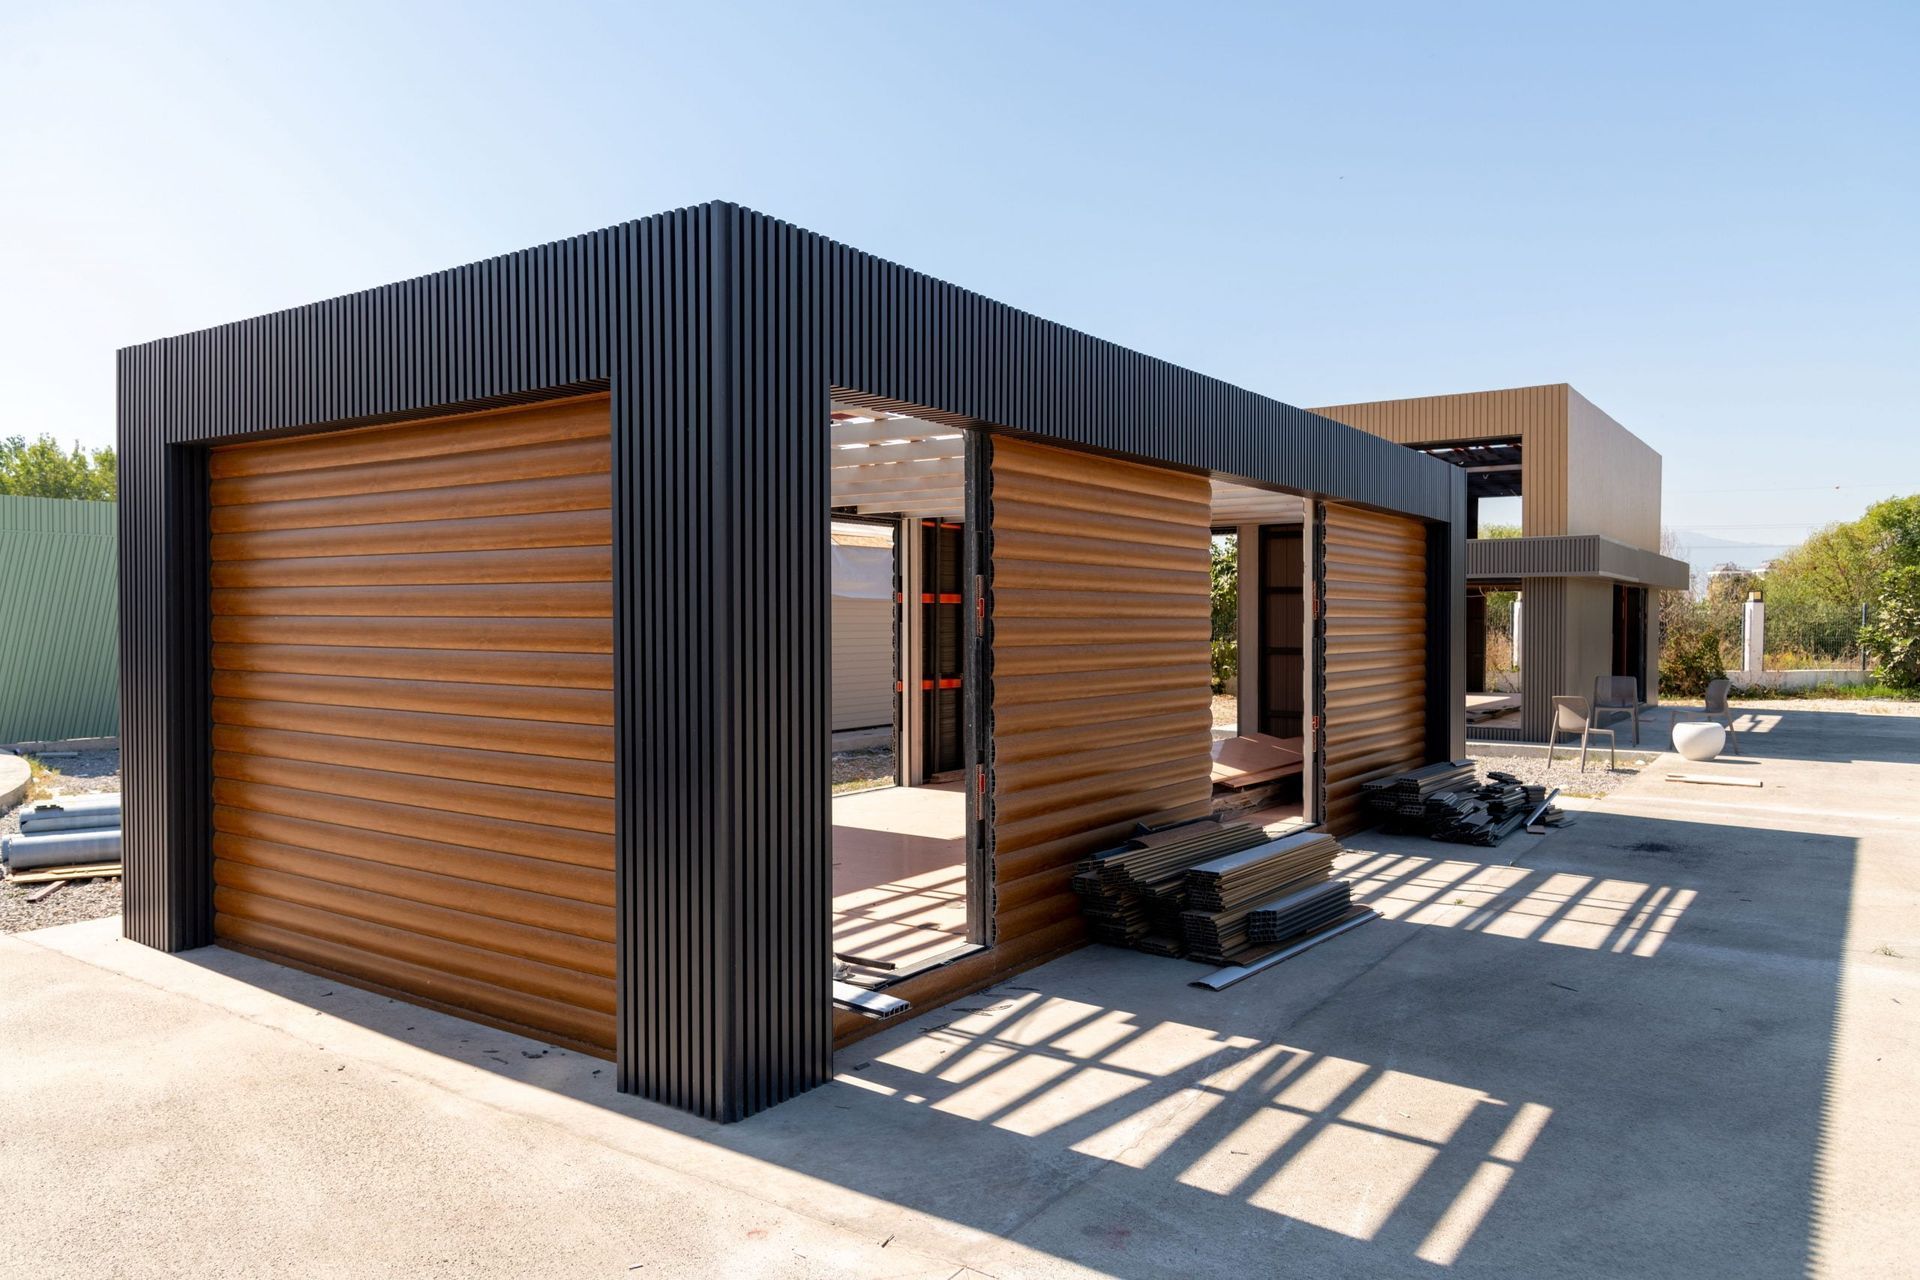 Tiny Homes – Why Steel May Be Your Best Choice